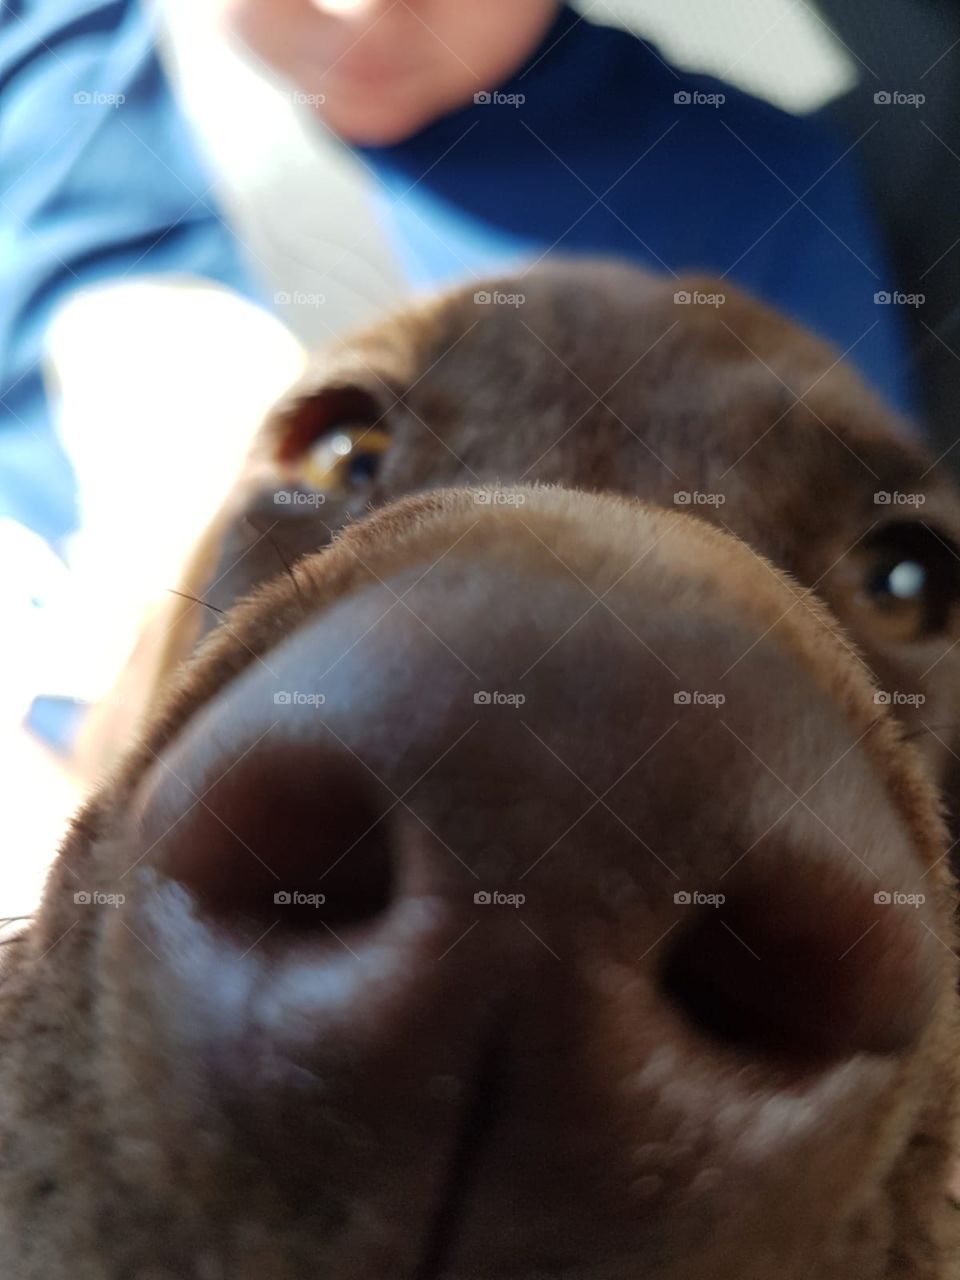 A curious puppy giving us a photo!